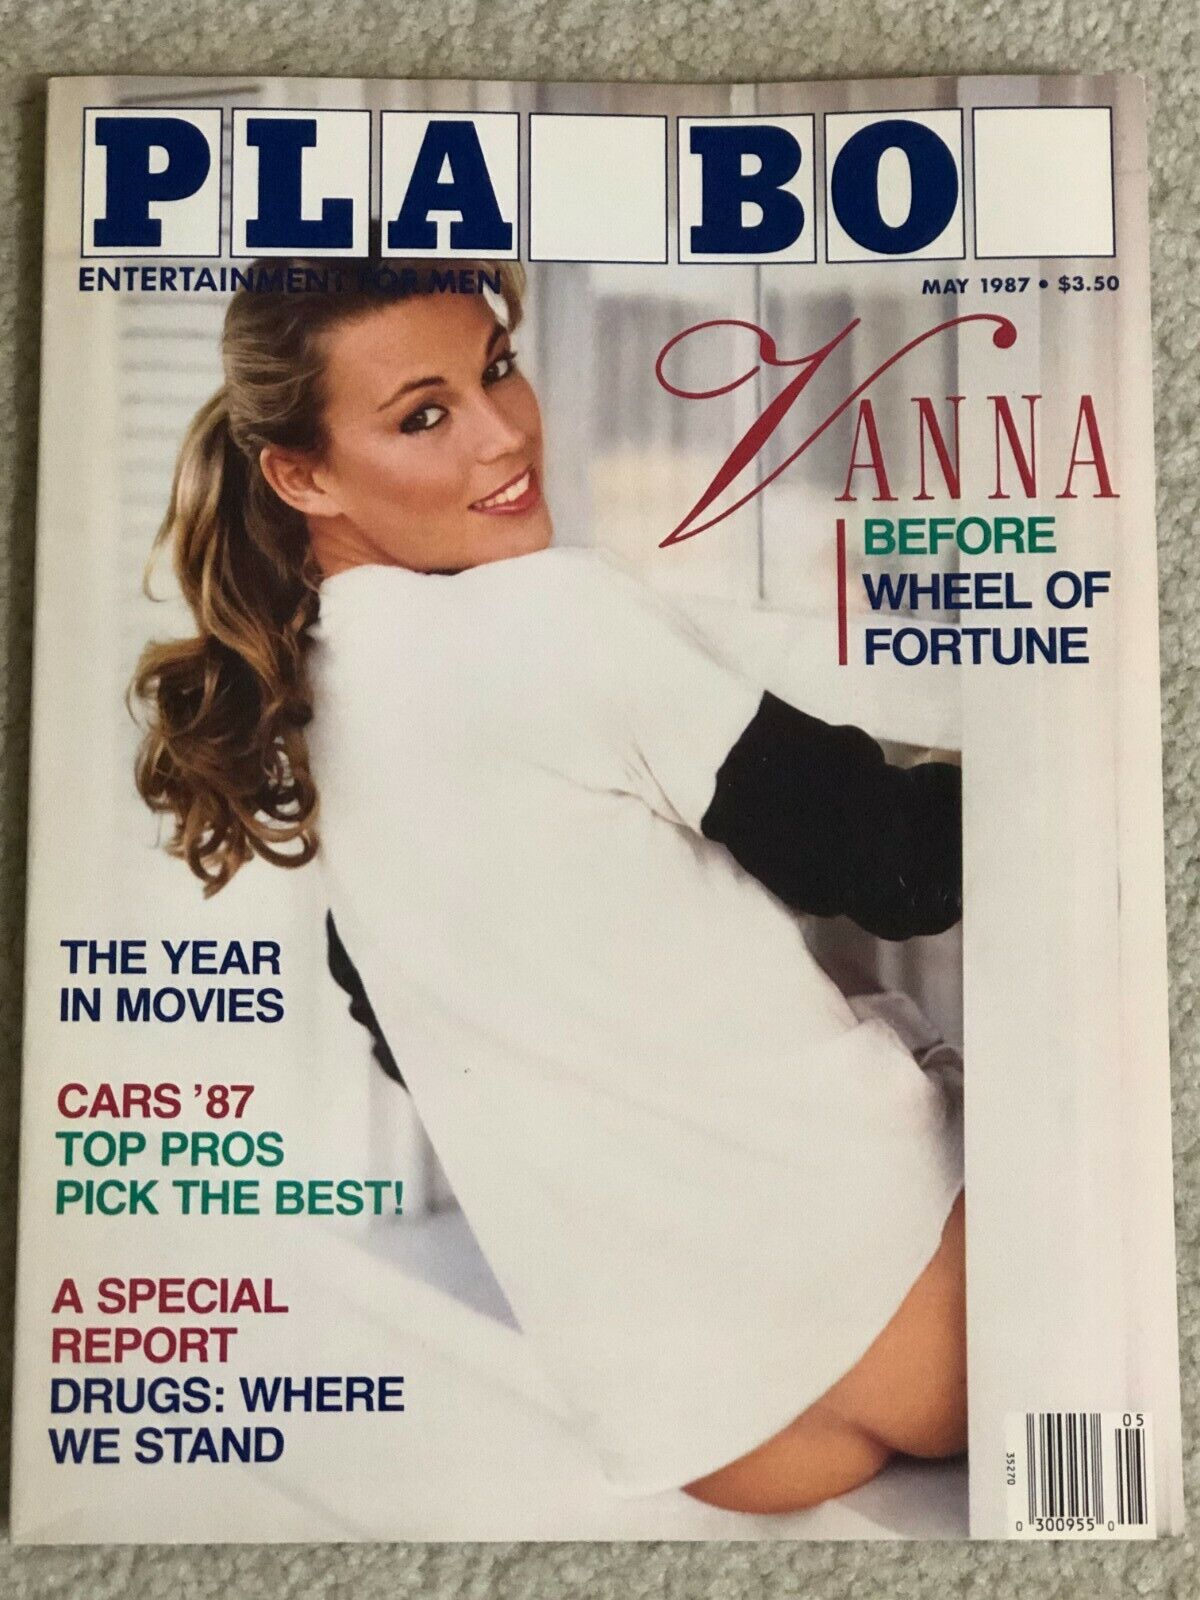 abigail levin add pictures of vanna white in playboy magazine photo